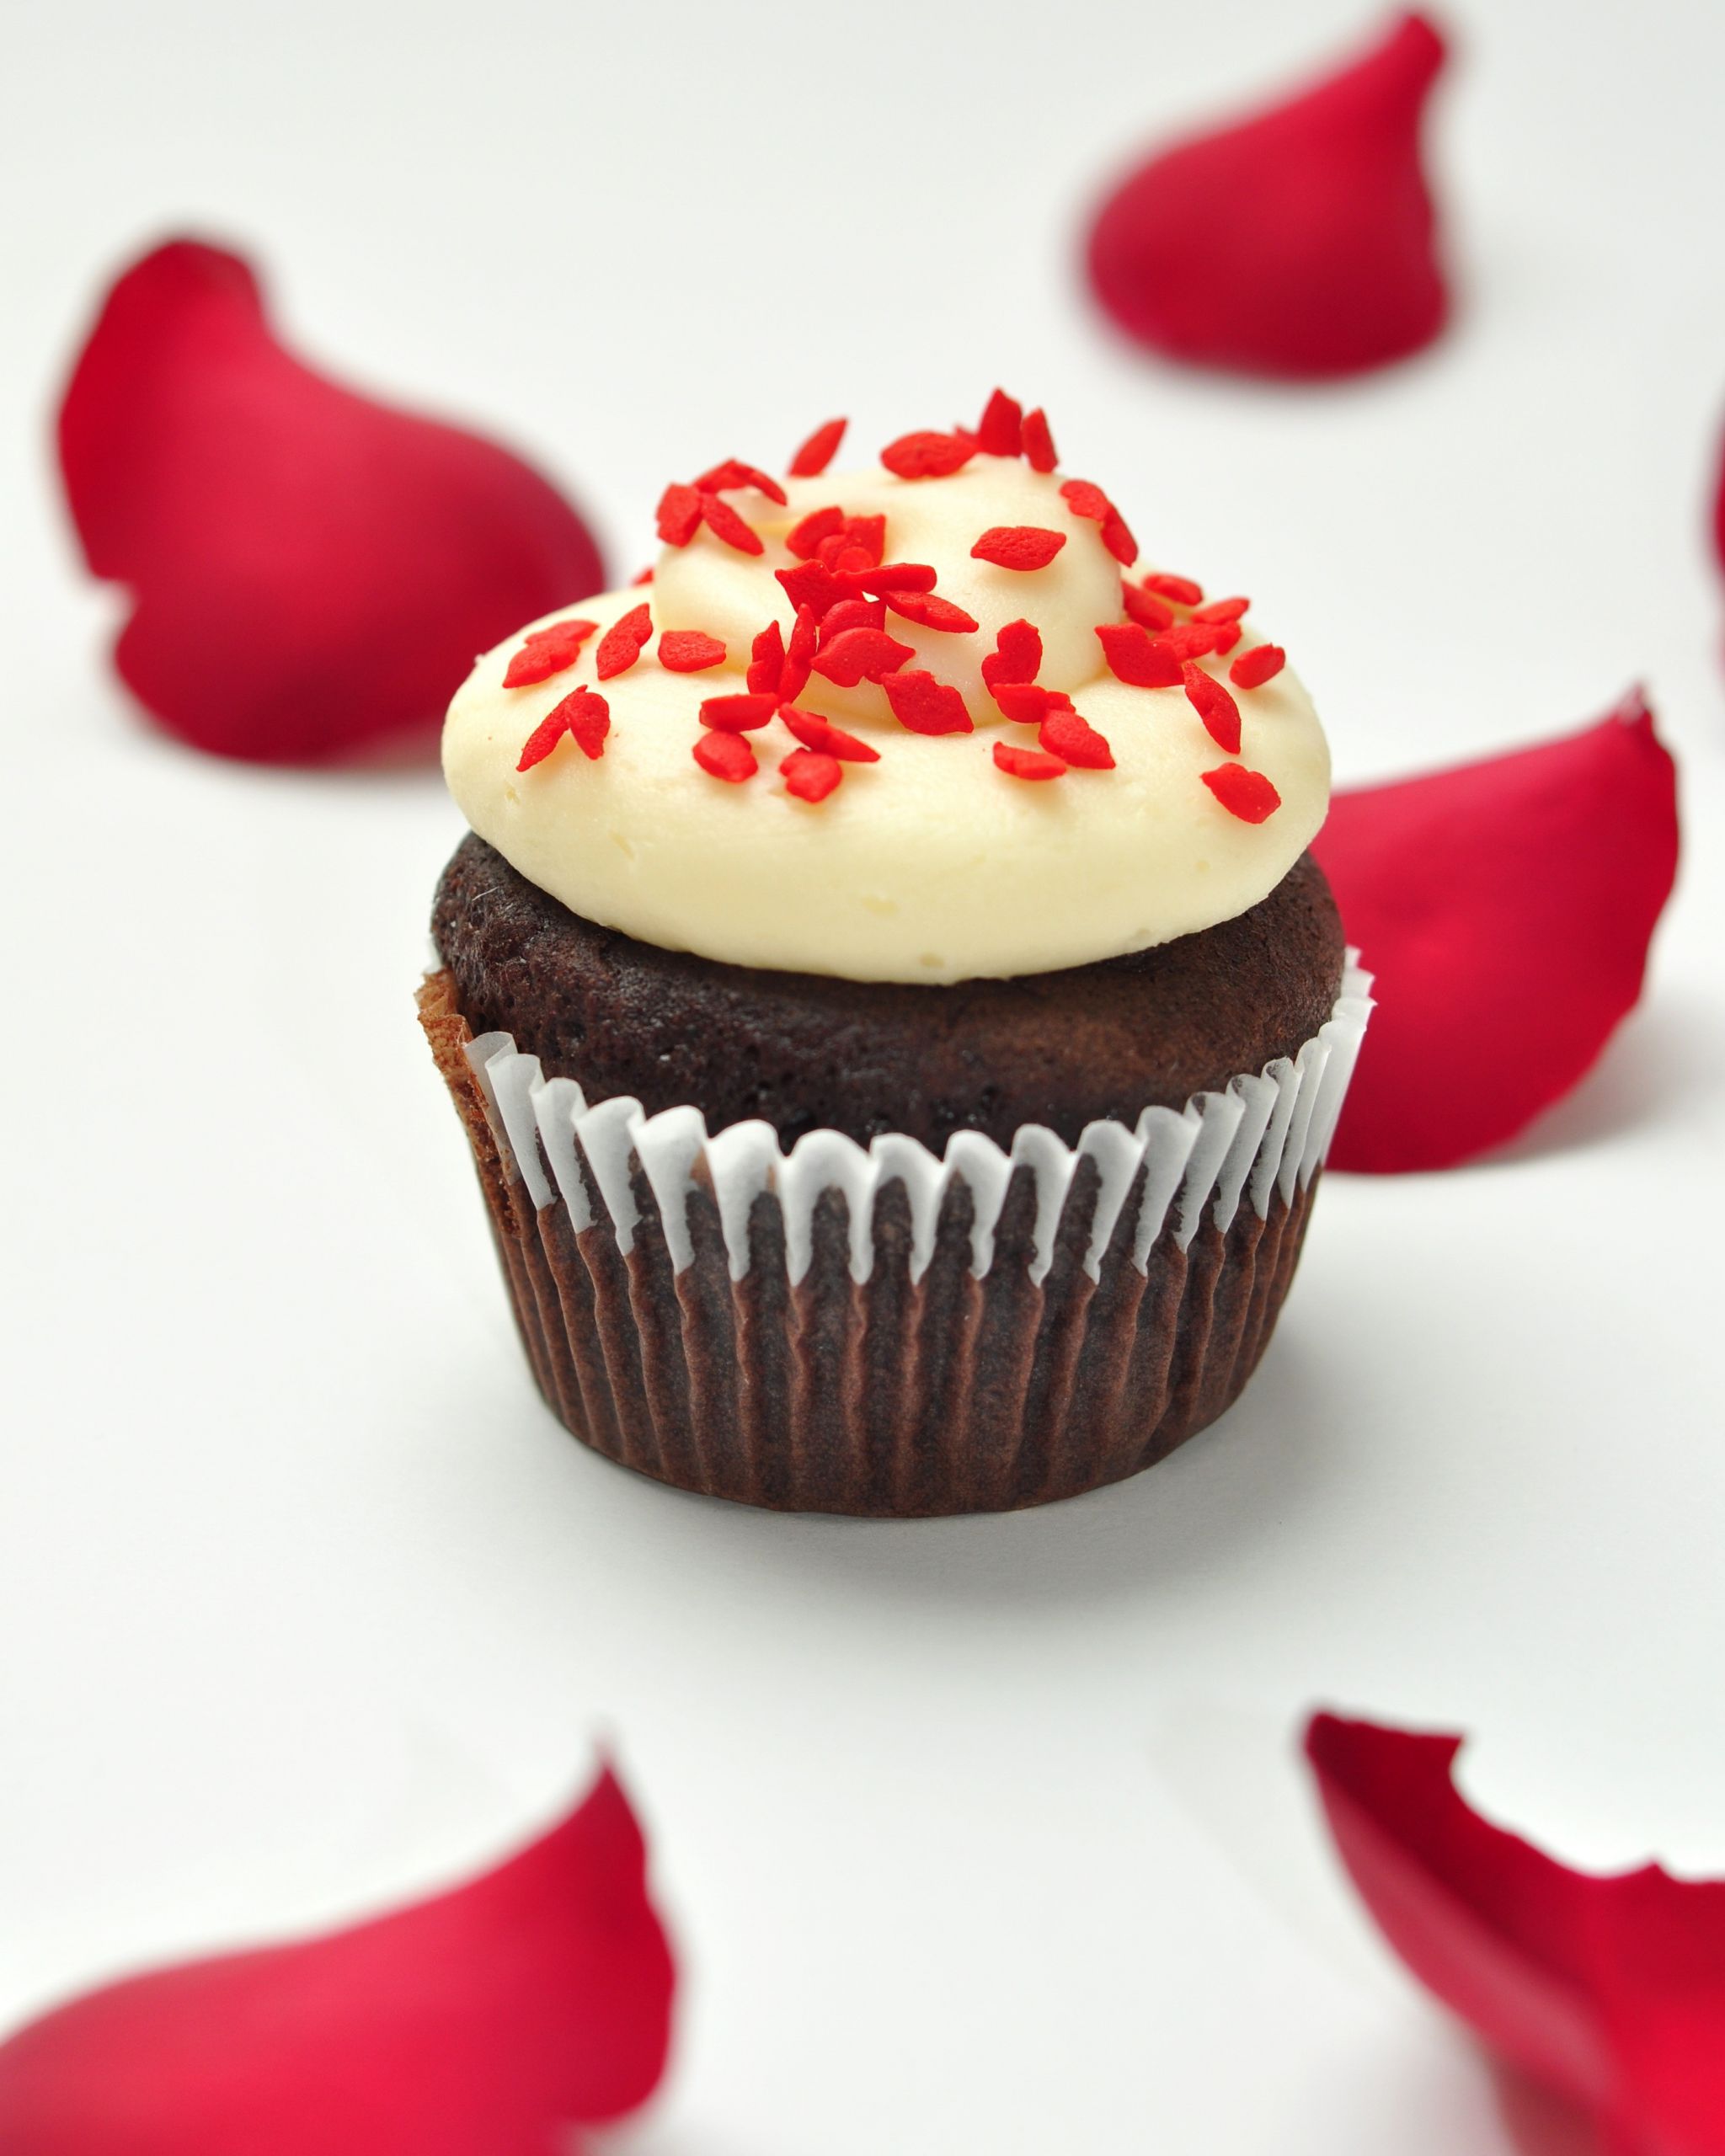 Valentines Day Cakes and Cupcakes Beautiful Valentines Day Cakes Cupcakes Mumbai 1 Cakes and